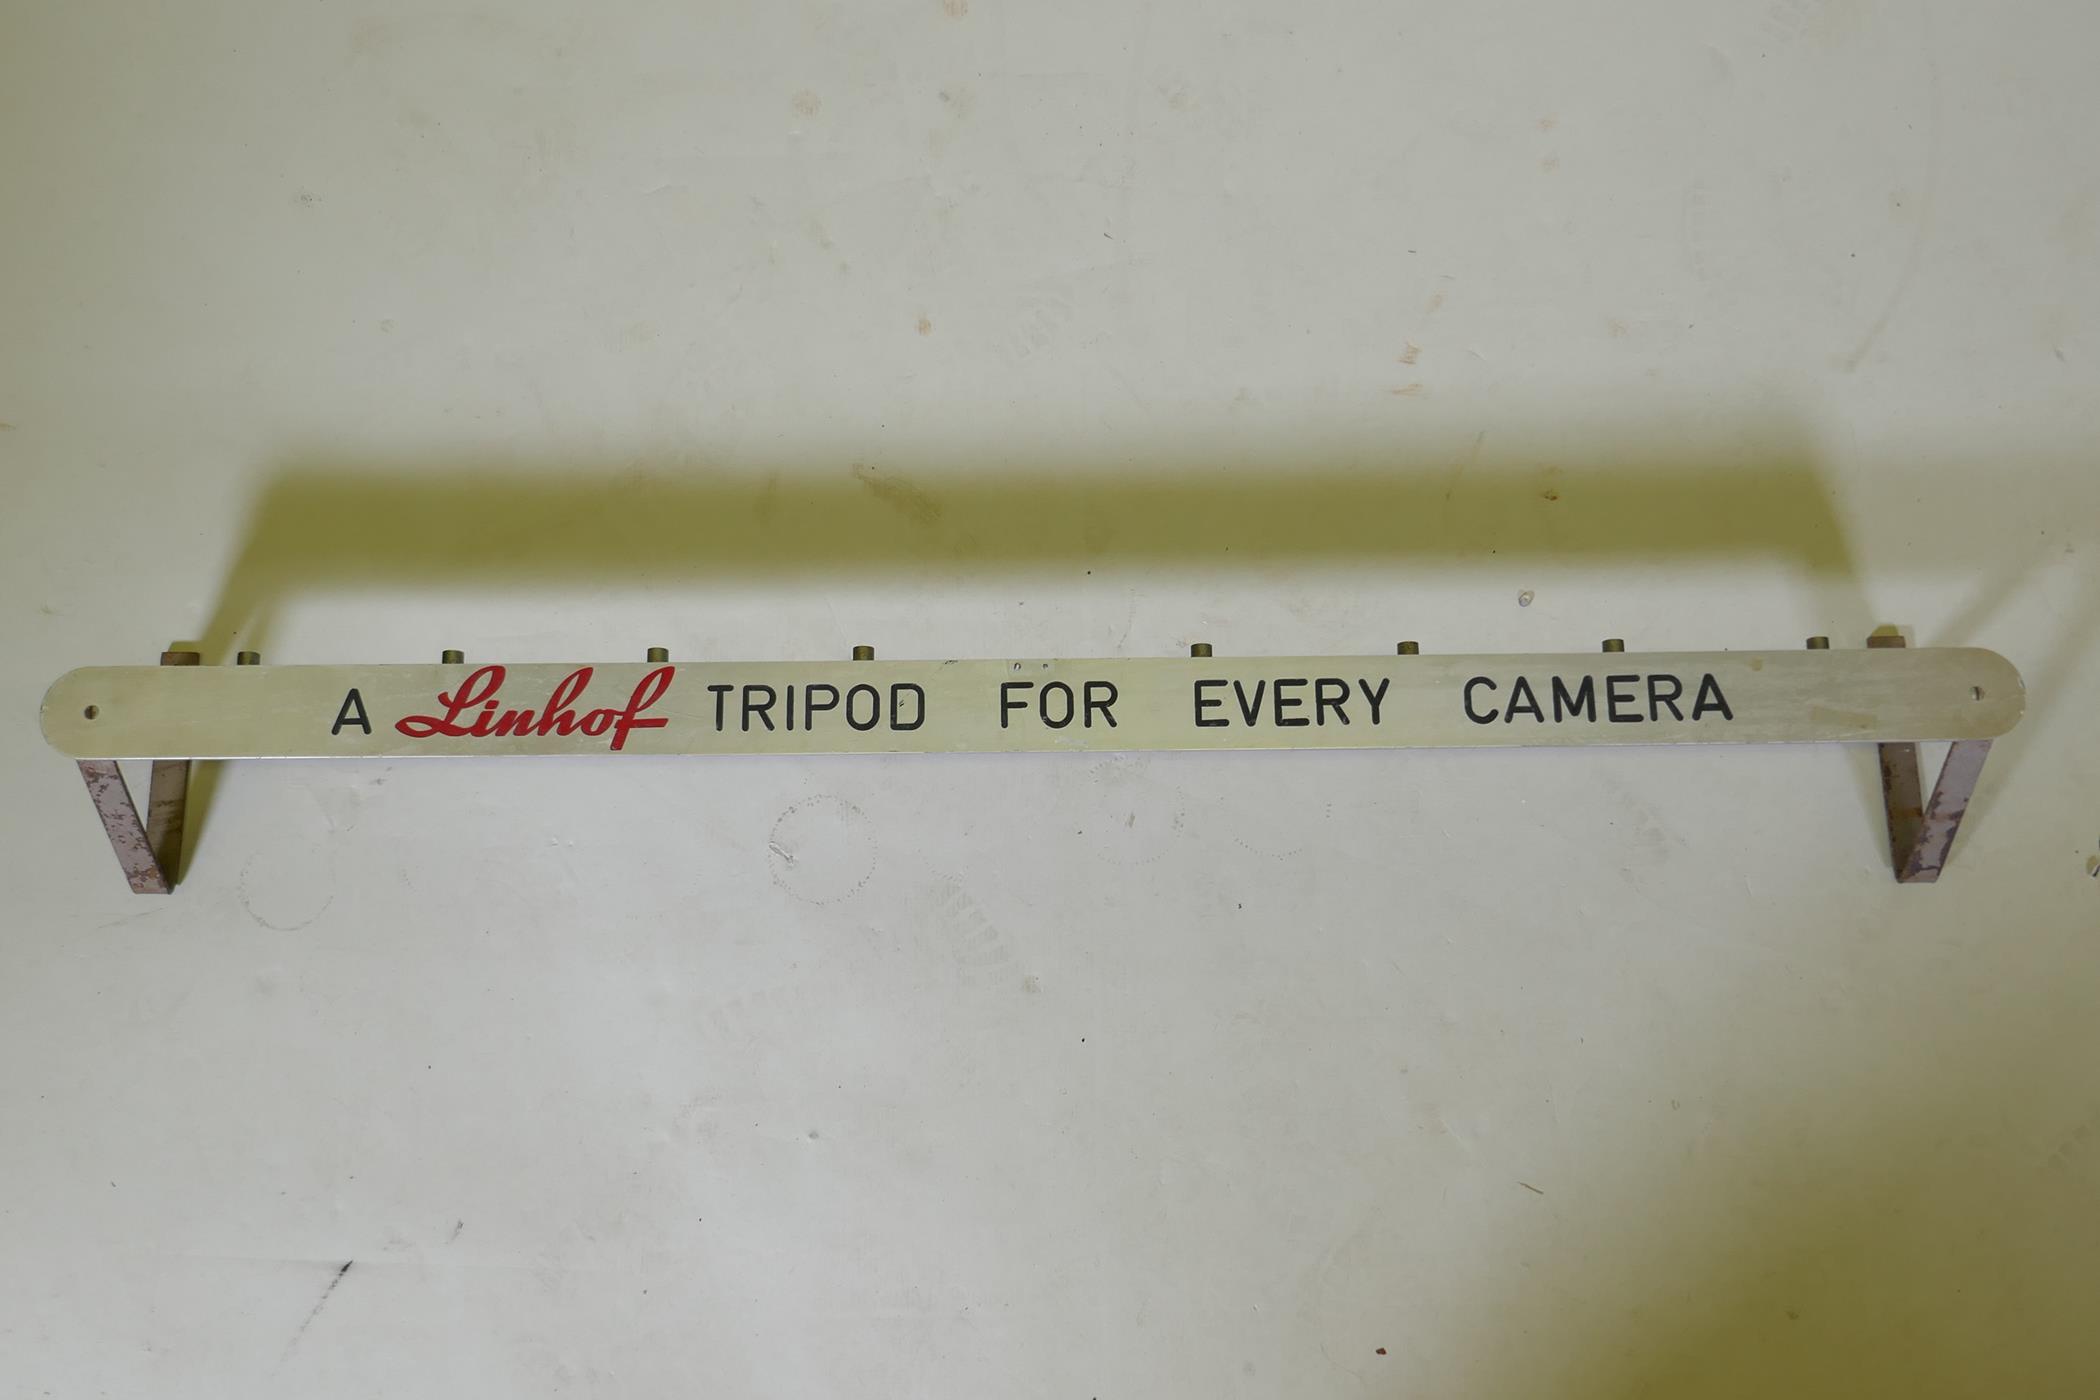 A 'Linhof Tripod for Every Camera' advertising wall mount, 125cm long